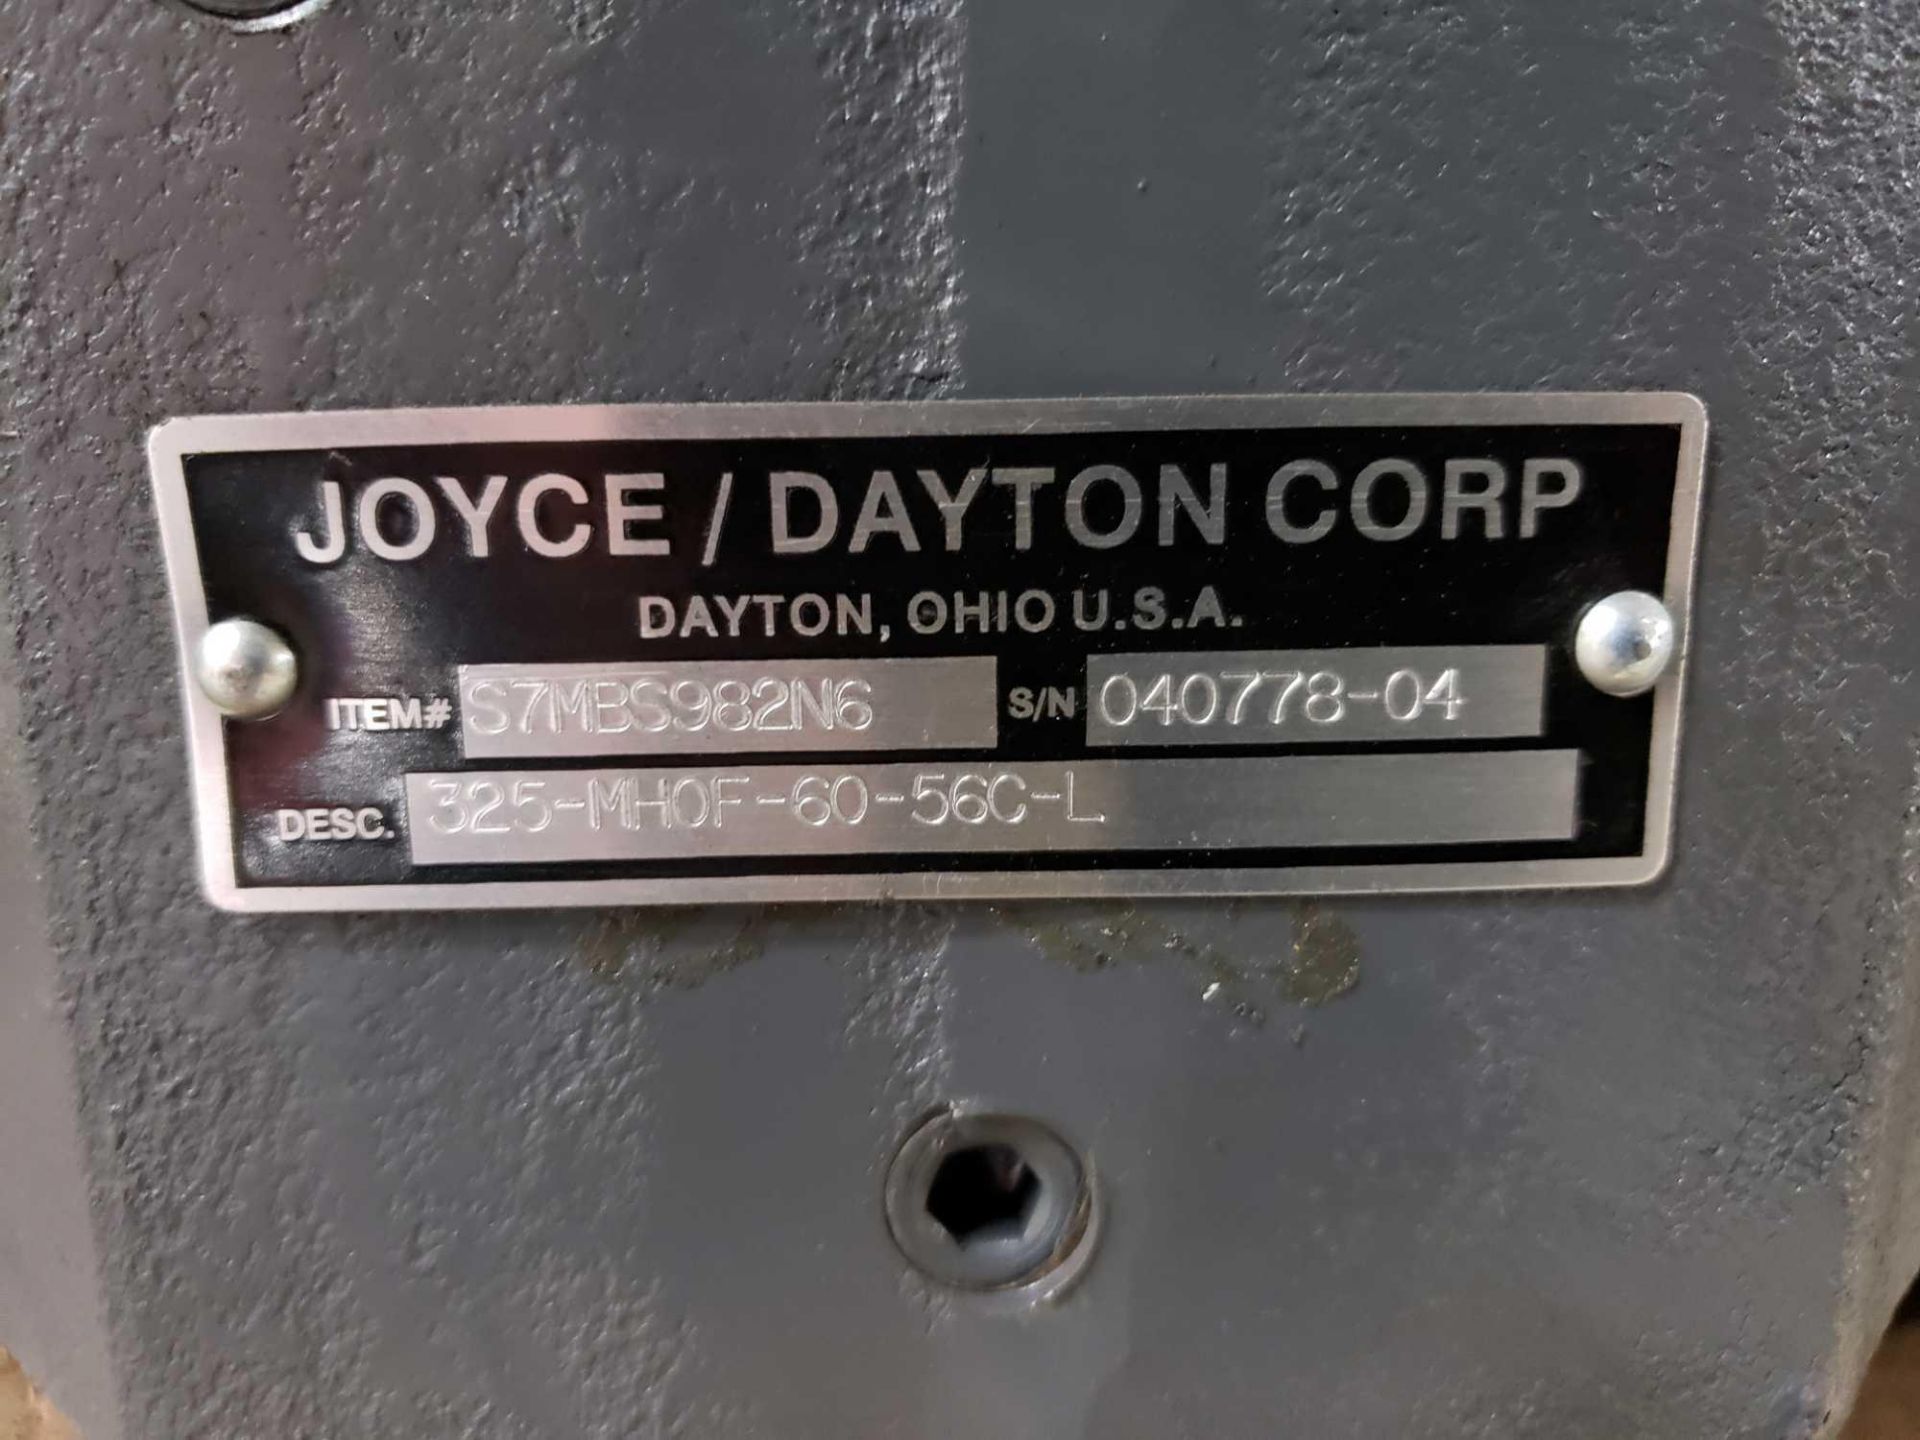 Joyce Dayton gearbox worm gear speed reducer model 325-MHOF-60-56C-L. New as pictured. - Image 2 of 3